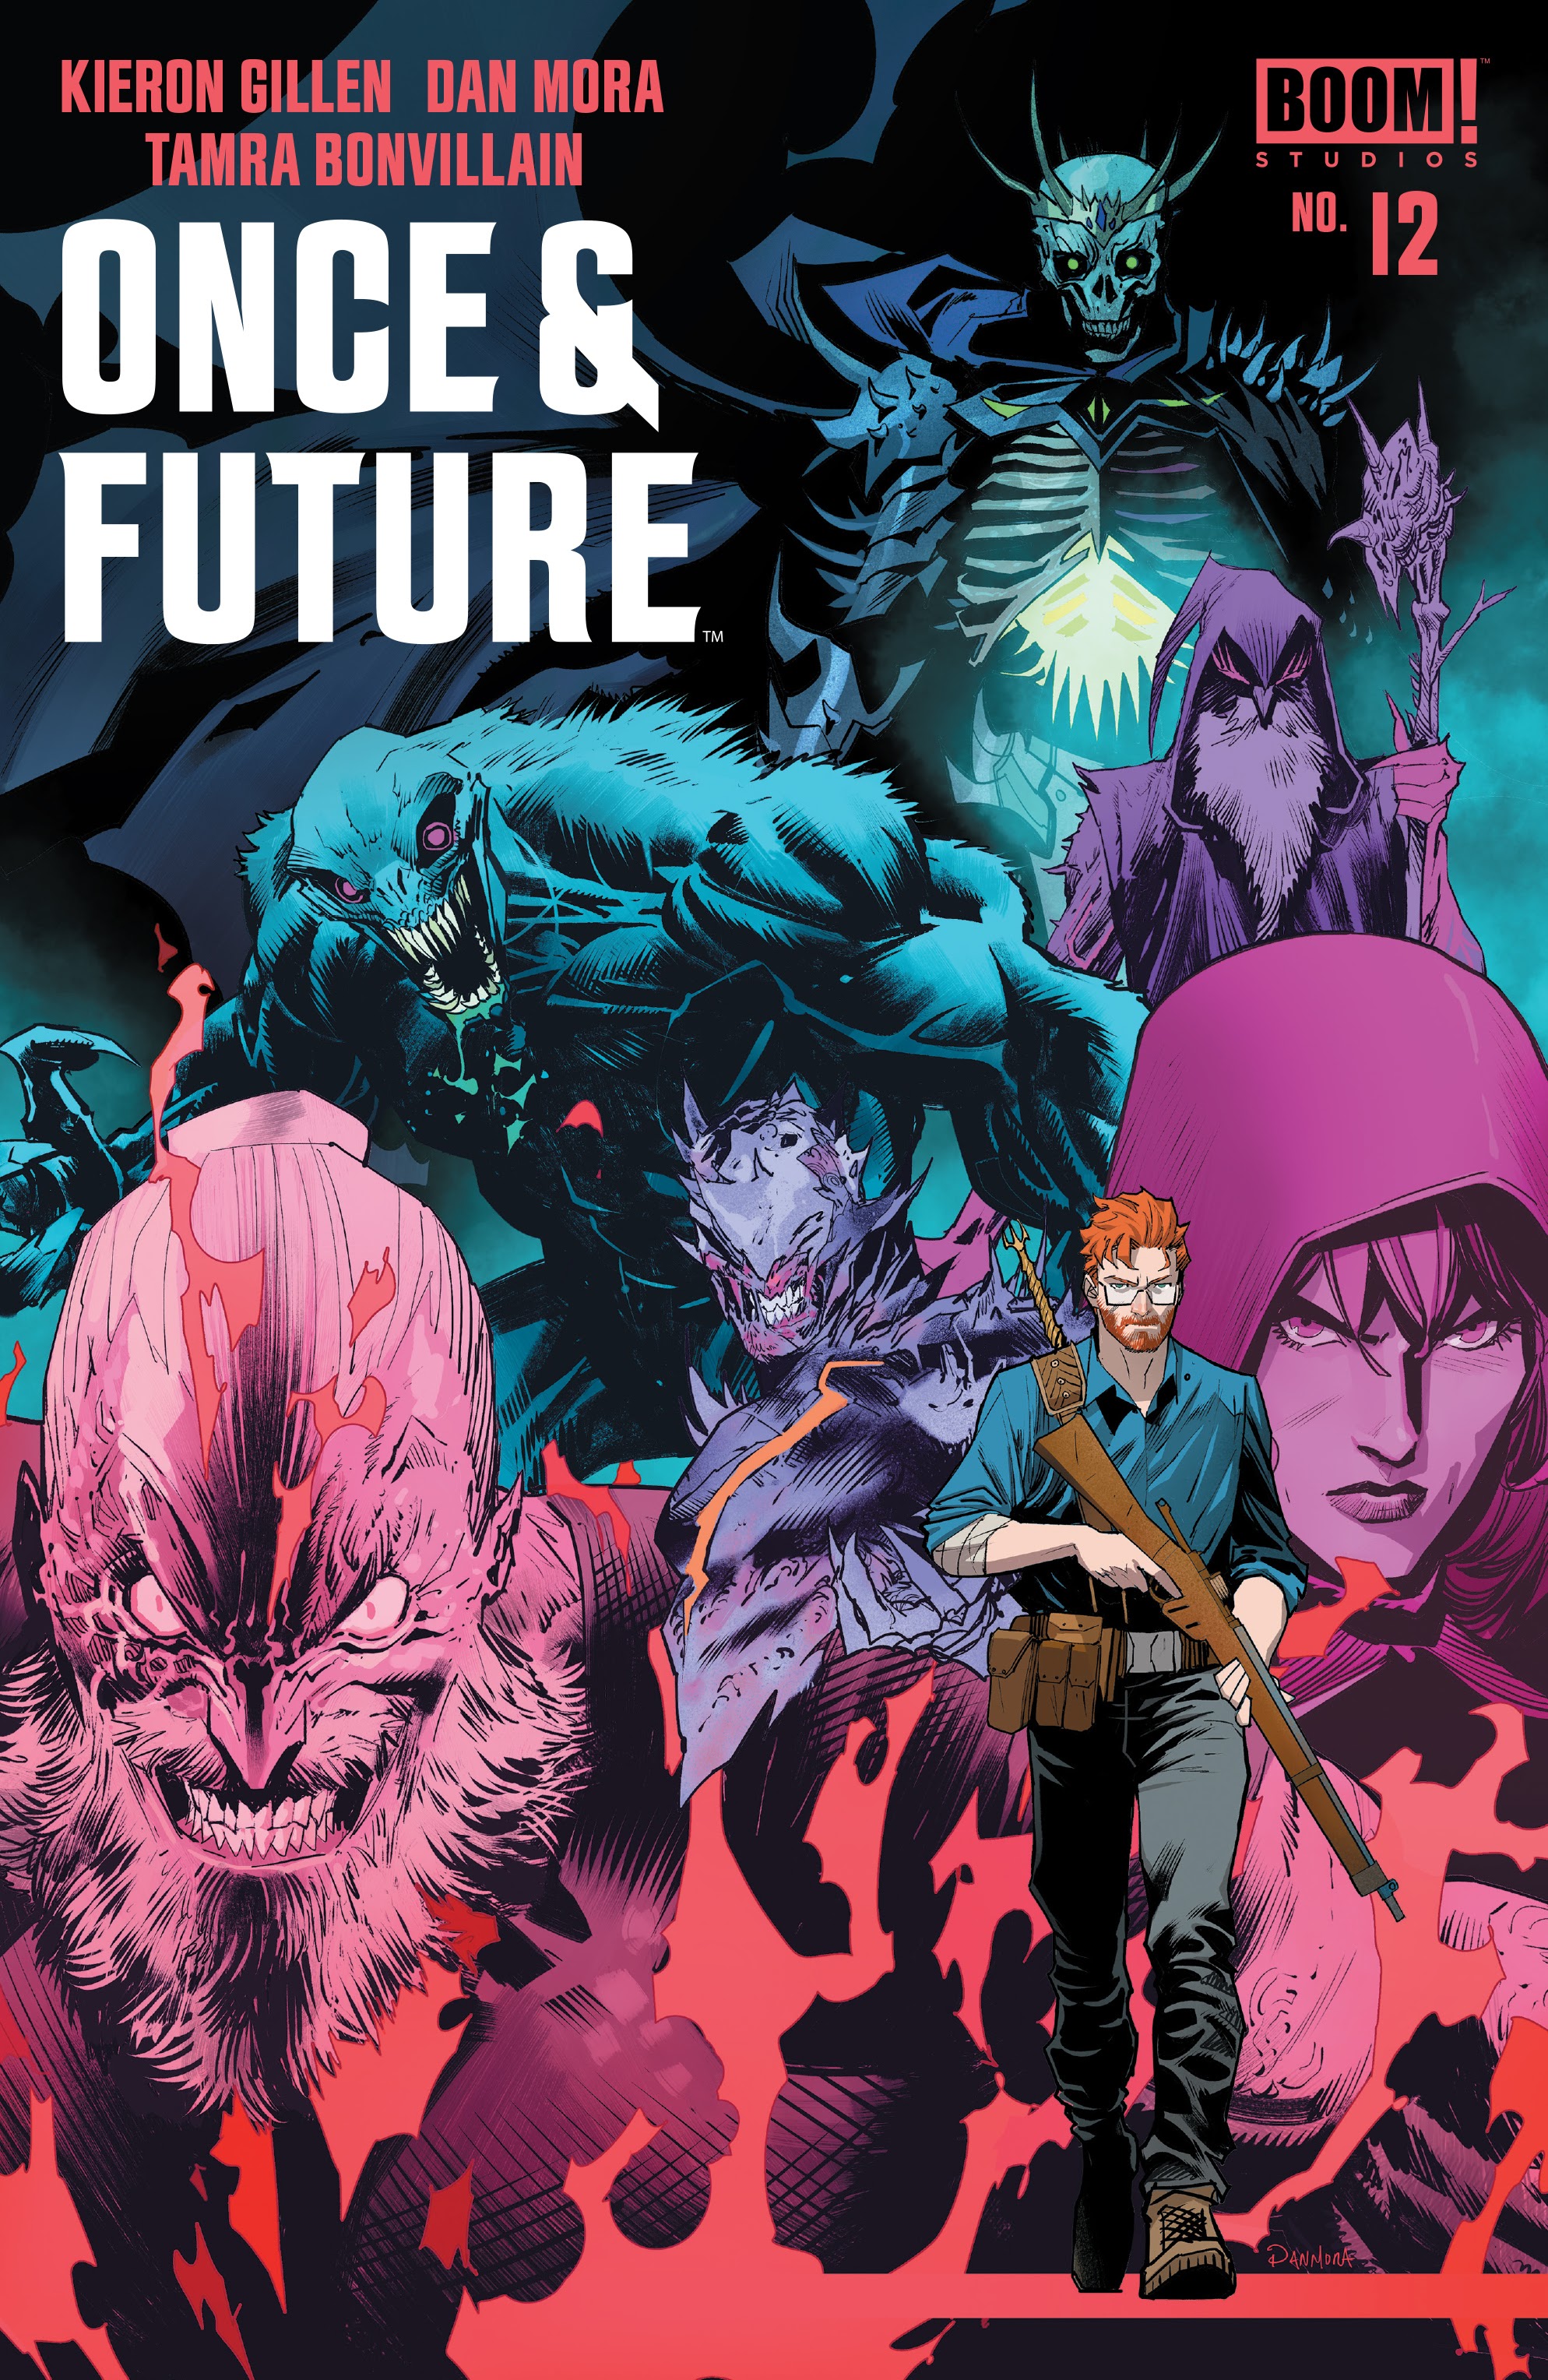 Read online Once & Future comic -  Issue #12 - 1